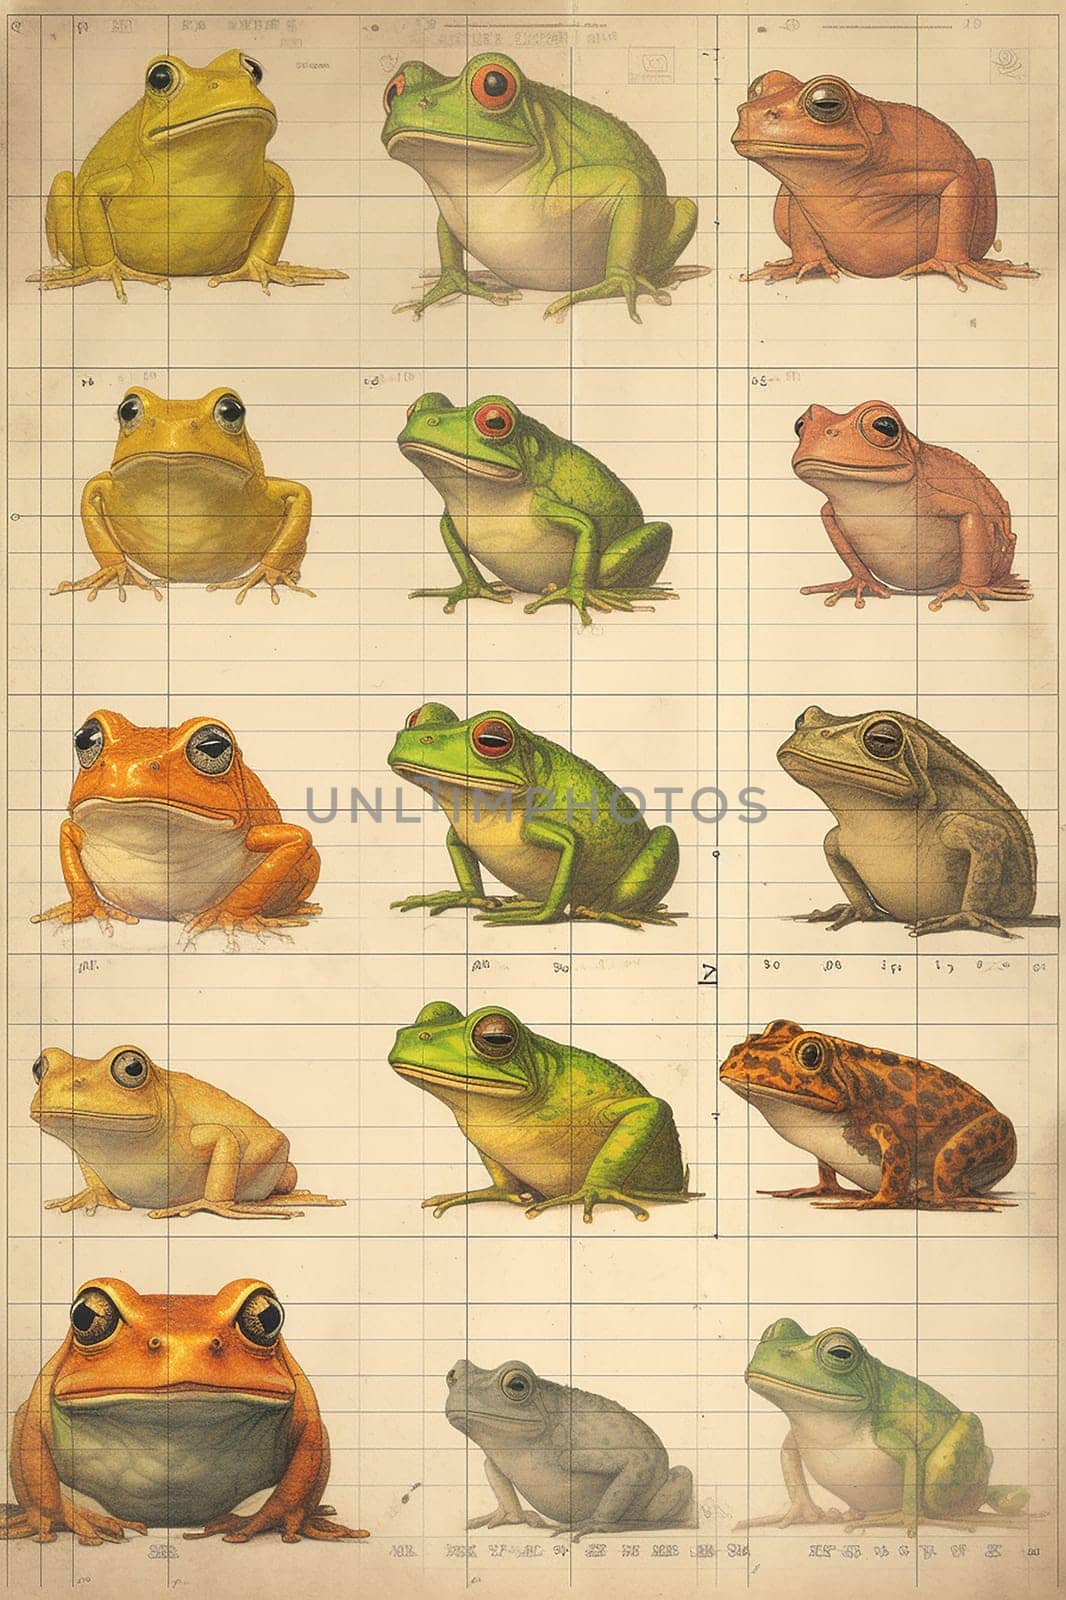 Collection of illustrated frogs with various poses and colors.